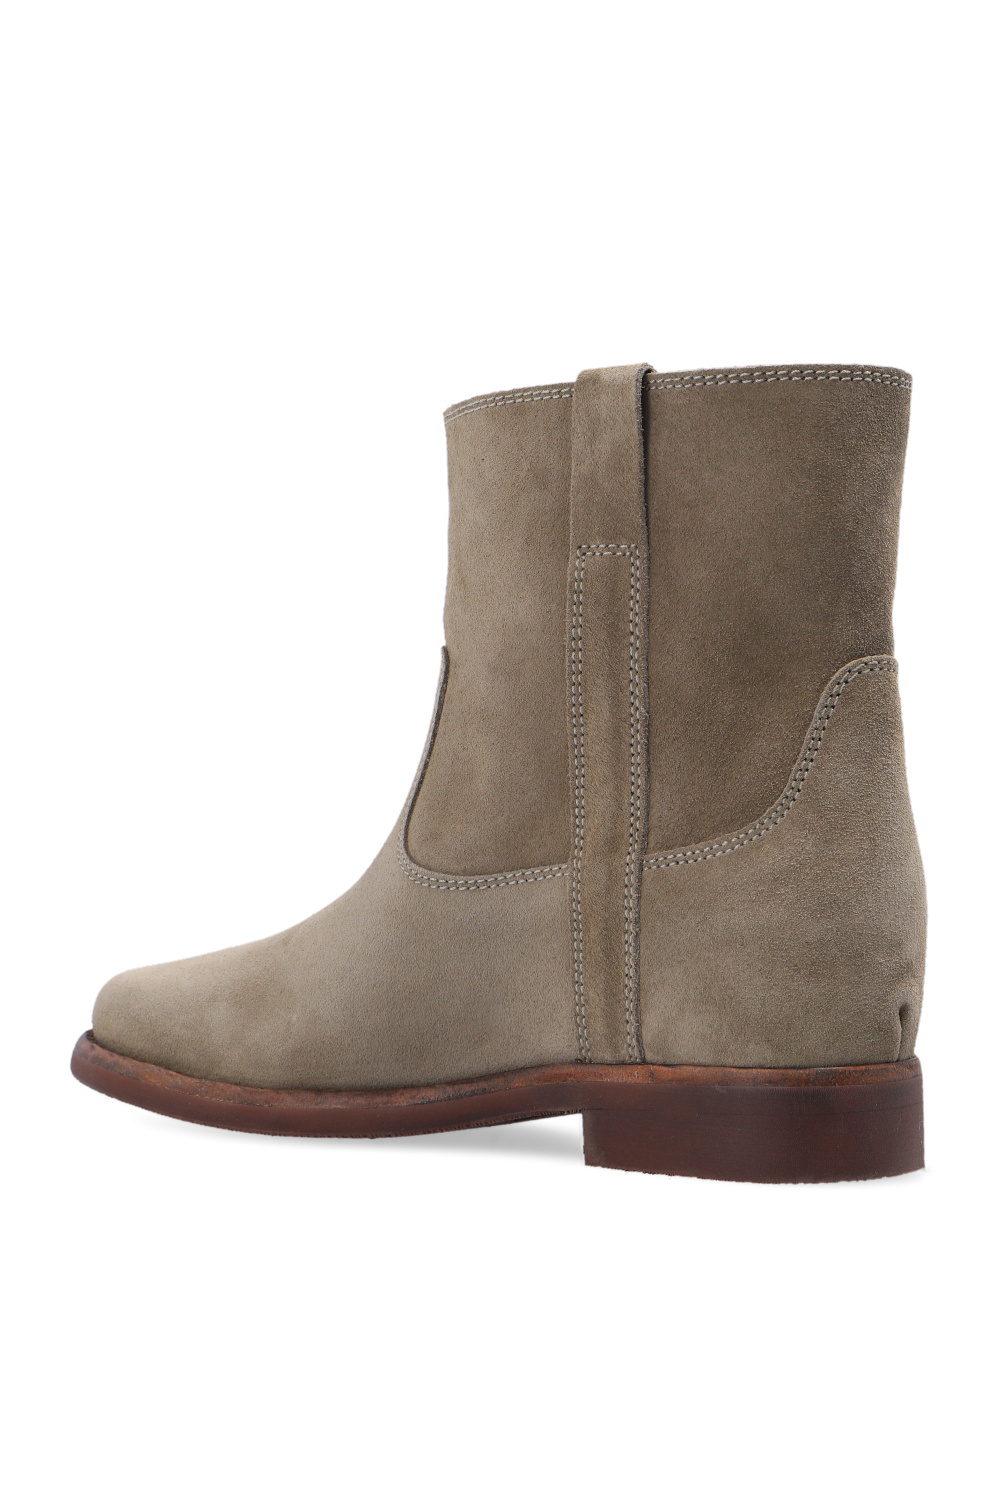 Isabel Marant ‘Susee’ suede Follow boots